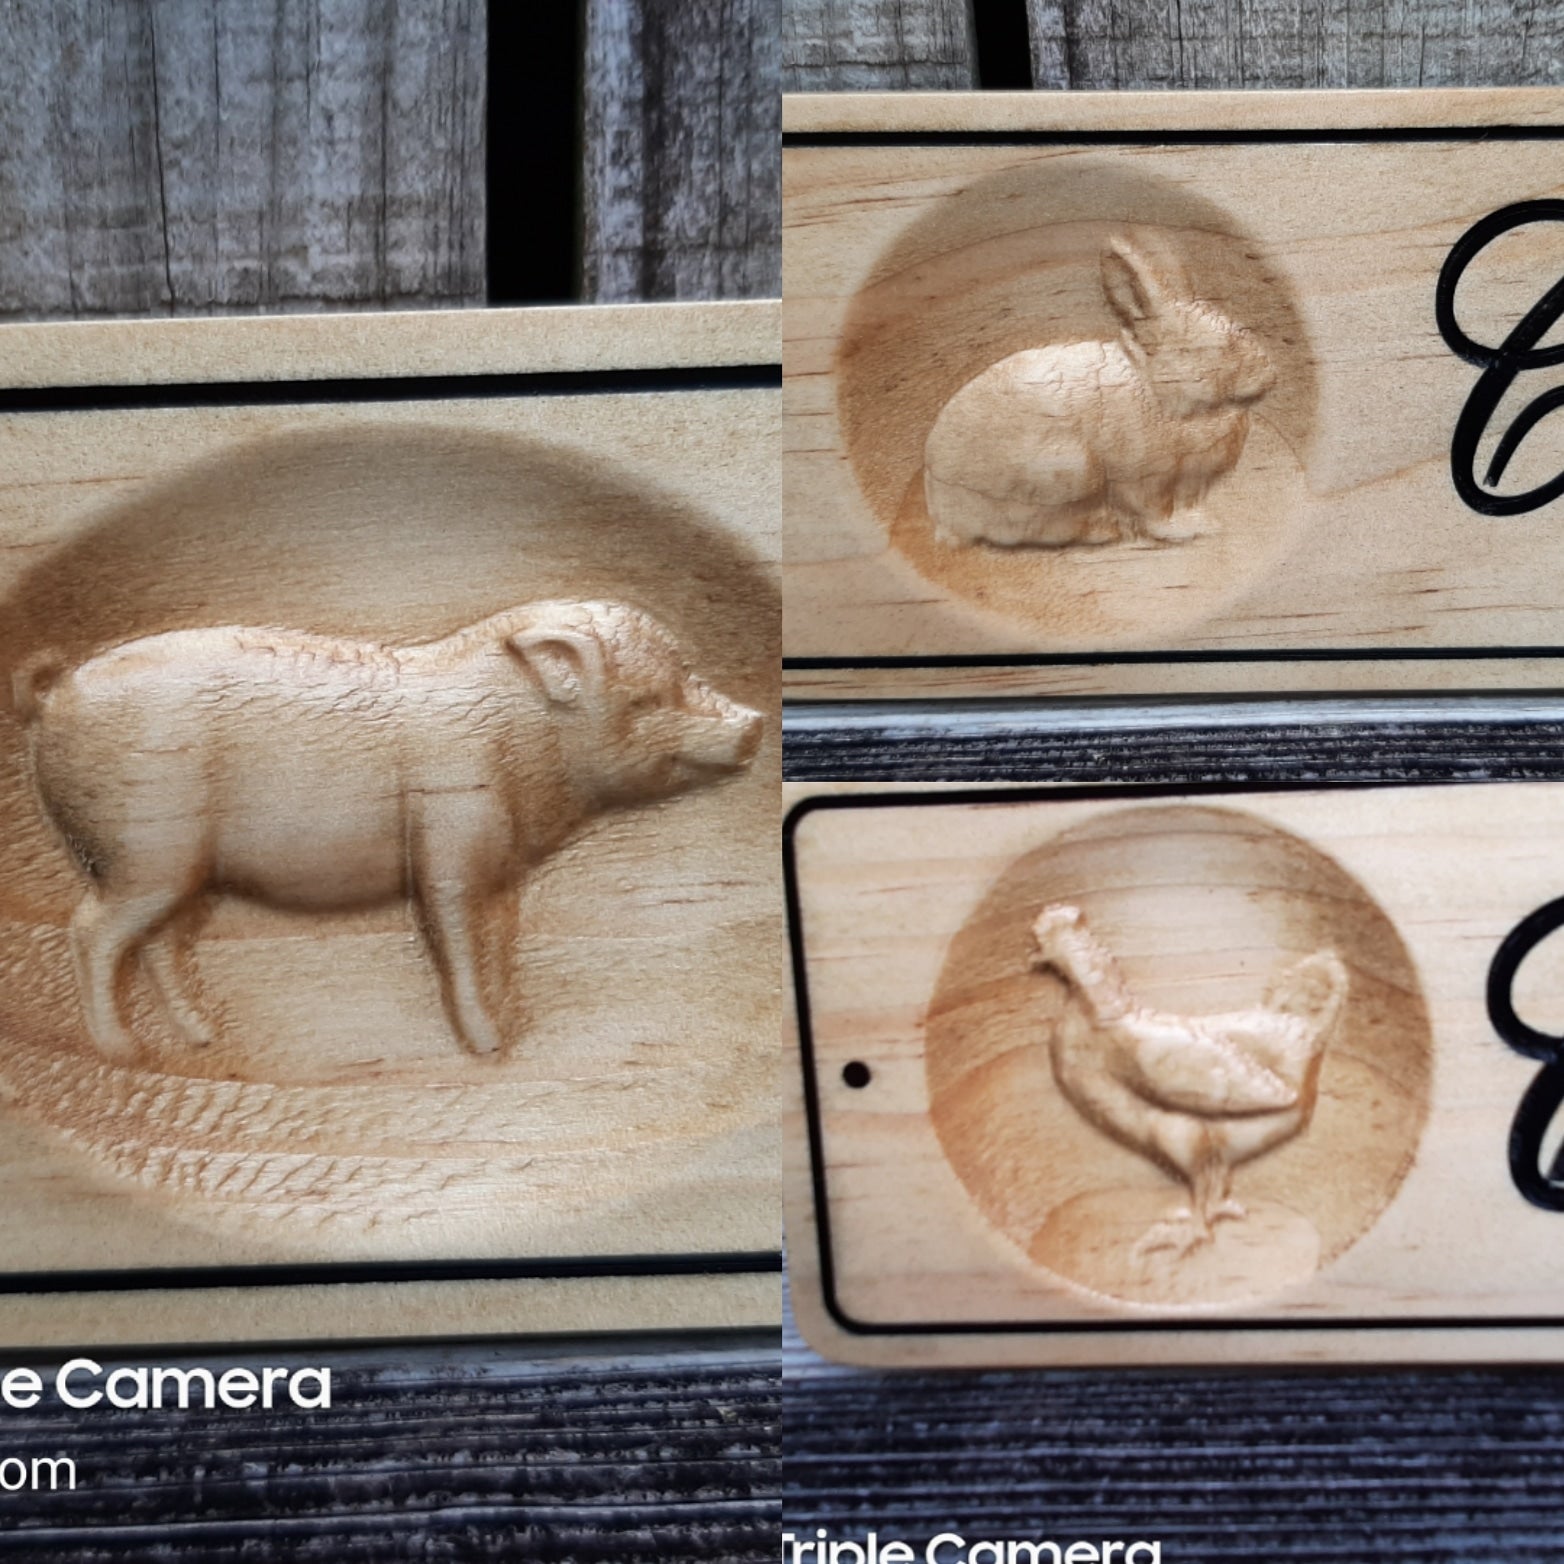 Personalized farm animal name signs, barn isle decorations, farm animal name plates made in the USA.